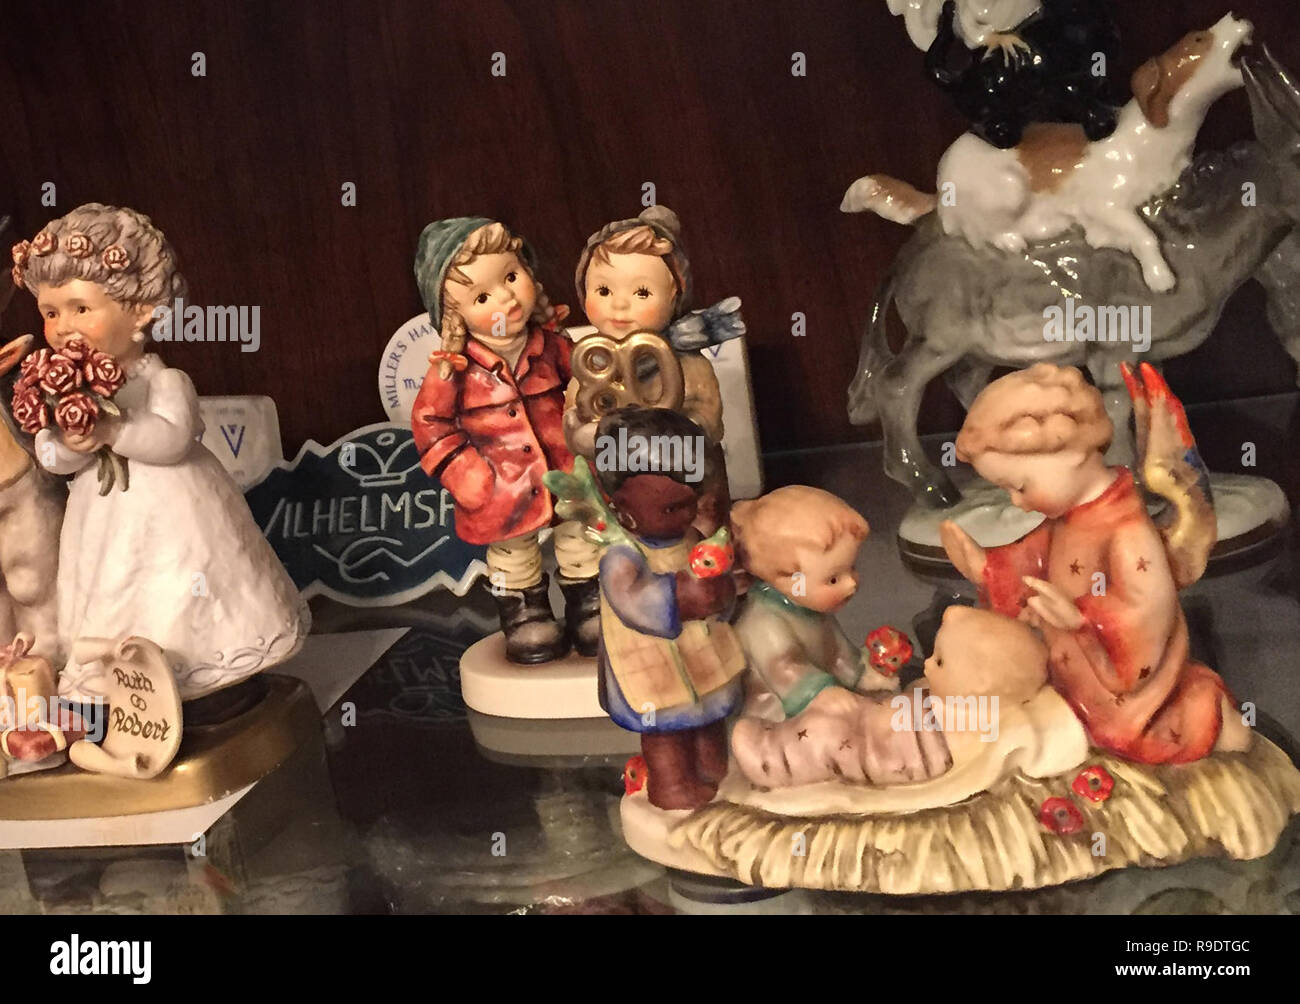 Eaton, USA. 21st Oct, 2018. The "Hummel" figure "Silent Night" (1935, r)  shows a baby Jesus and three little angels bending over the cradle, one of  the three angels is black. (to